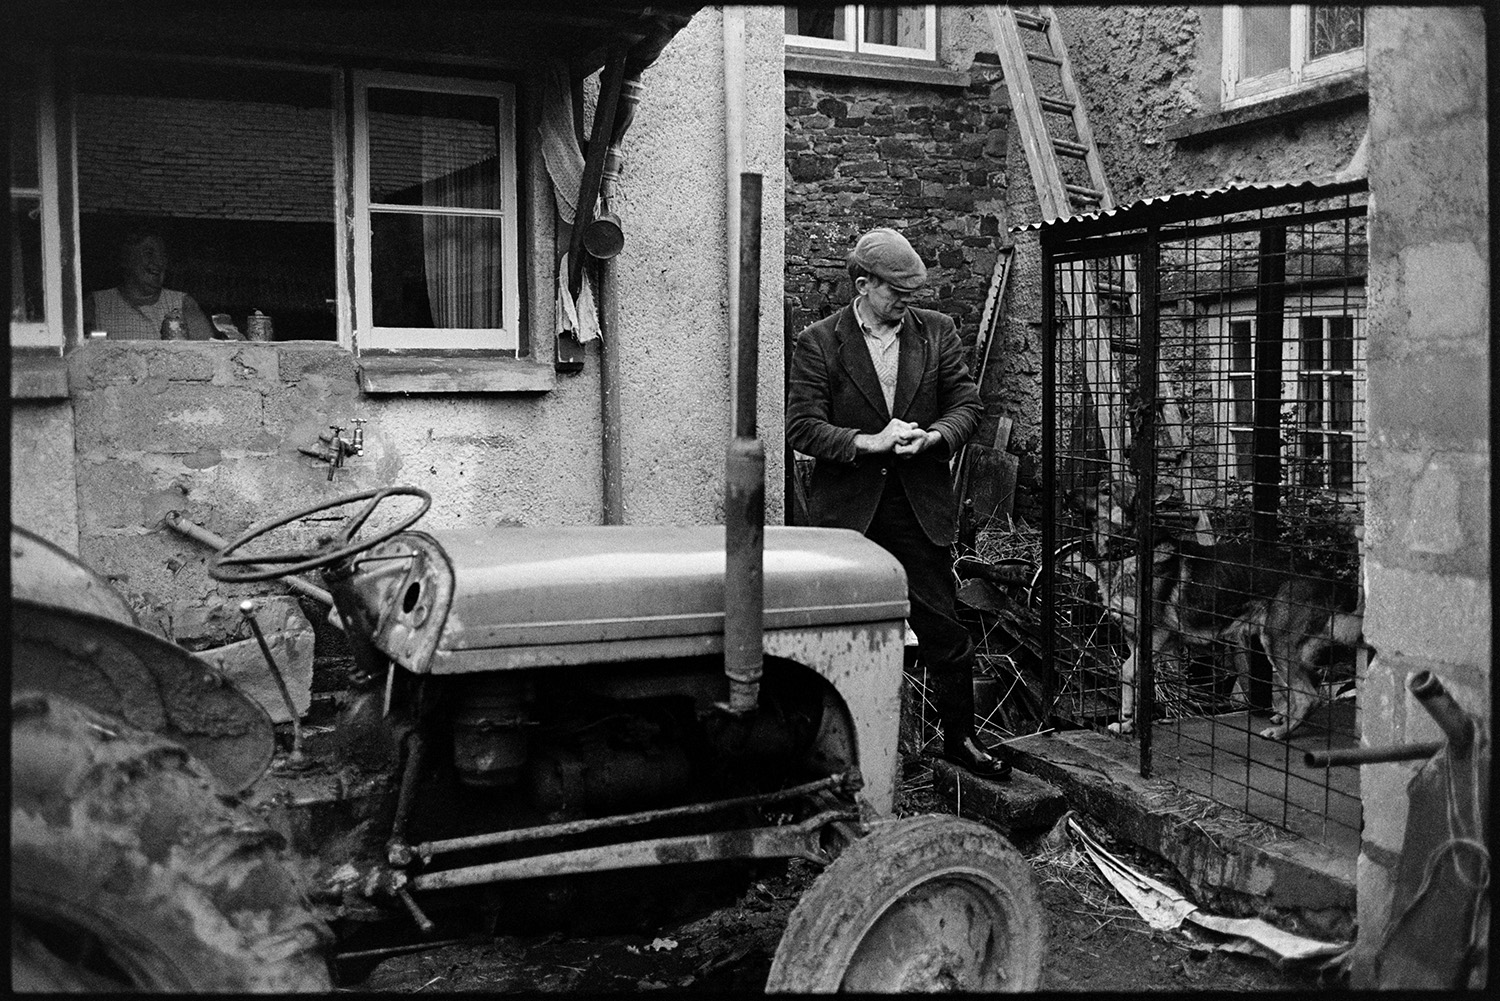 Farmer at farm door, with dog. 
[Jim Woolacott outside his farmhouse at Verdun, Atherington. His is stood next to a dog in a cage and a tractor.]